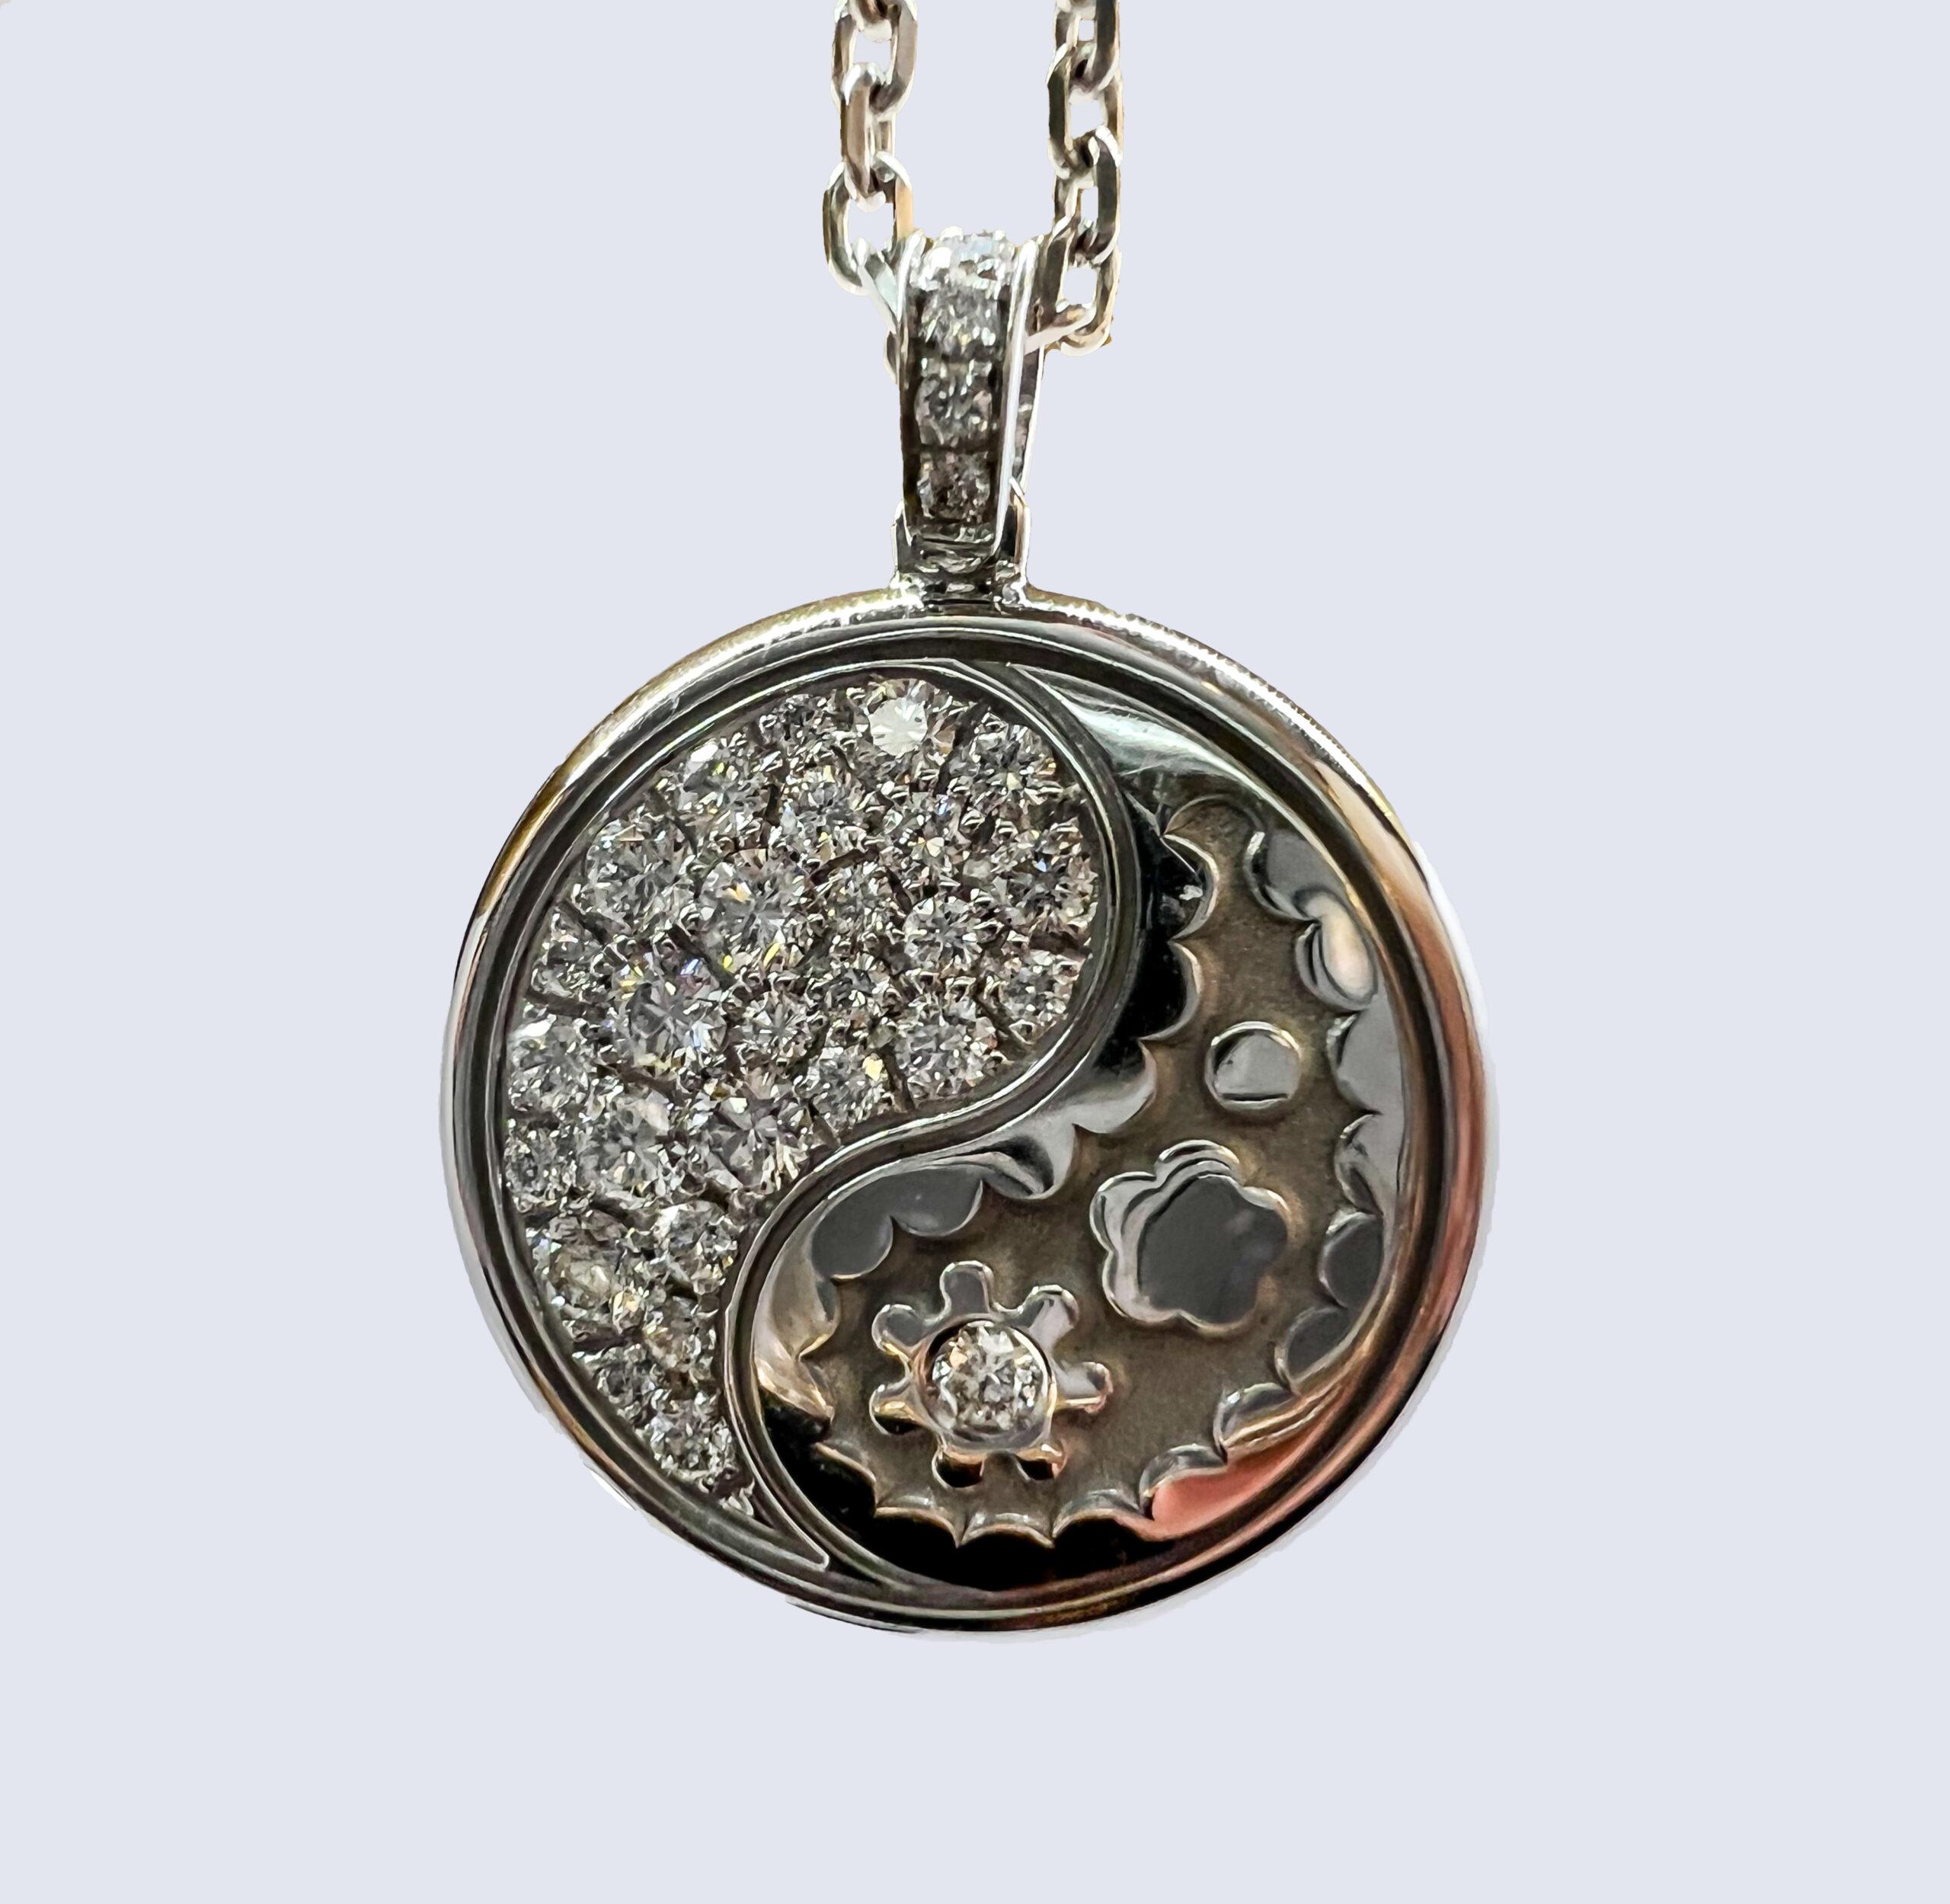 18K White Gold pendant. 18K White Gold cable chain with lobster claw lock. This pedant is reversible. Both sides are decorated as Yin Yang symbol. One side is decorated with White Diamonds and other side is decorated with Black Diamonds. All